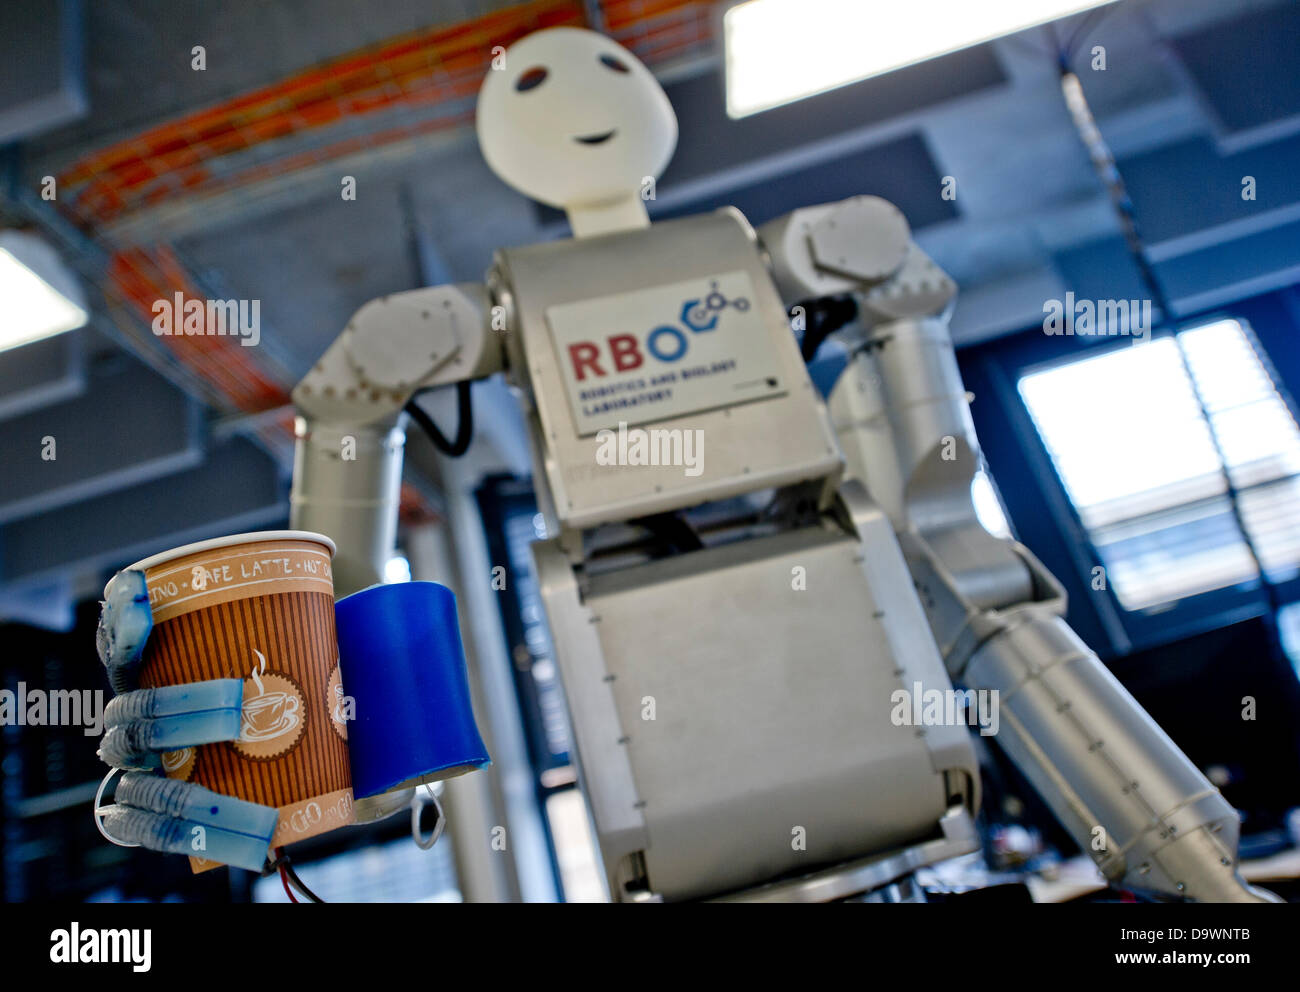 Robot 'Meka' manufactured by 'Meka Robotics' holds a cup of coffee at the Technische Universitaet (TU) in Berlin, Germany, 27 June 2013. The 'Softhands' or 'RBO Hand' have been developed by the Robotics and Biology (RBO) Laboratory of the TU Berlin. Photo: Nicolas Armer Stock Photo